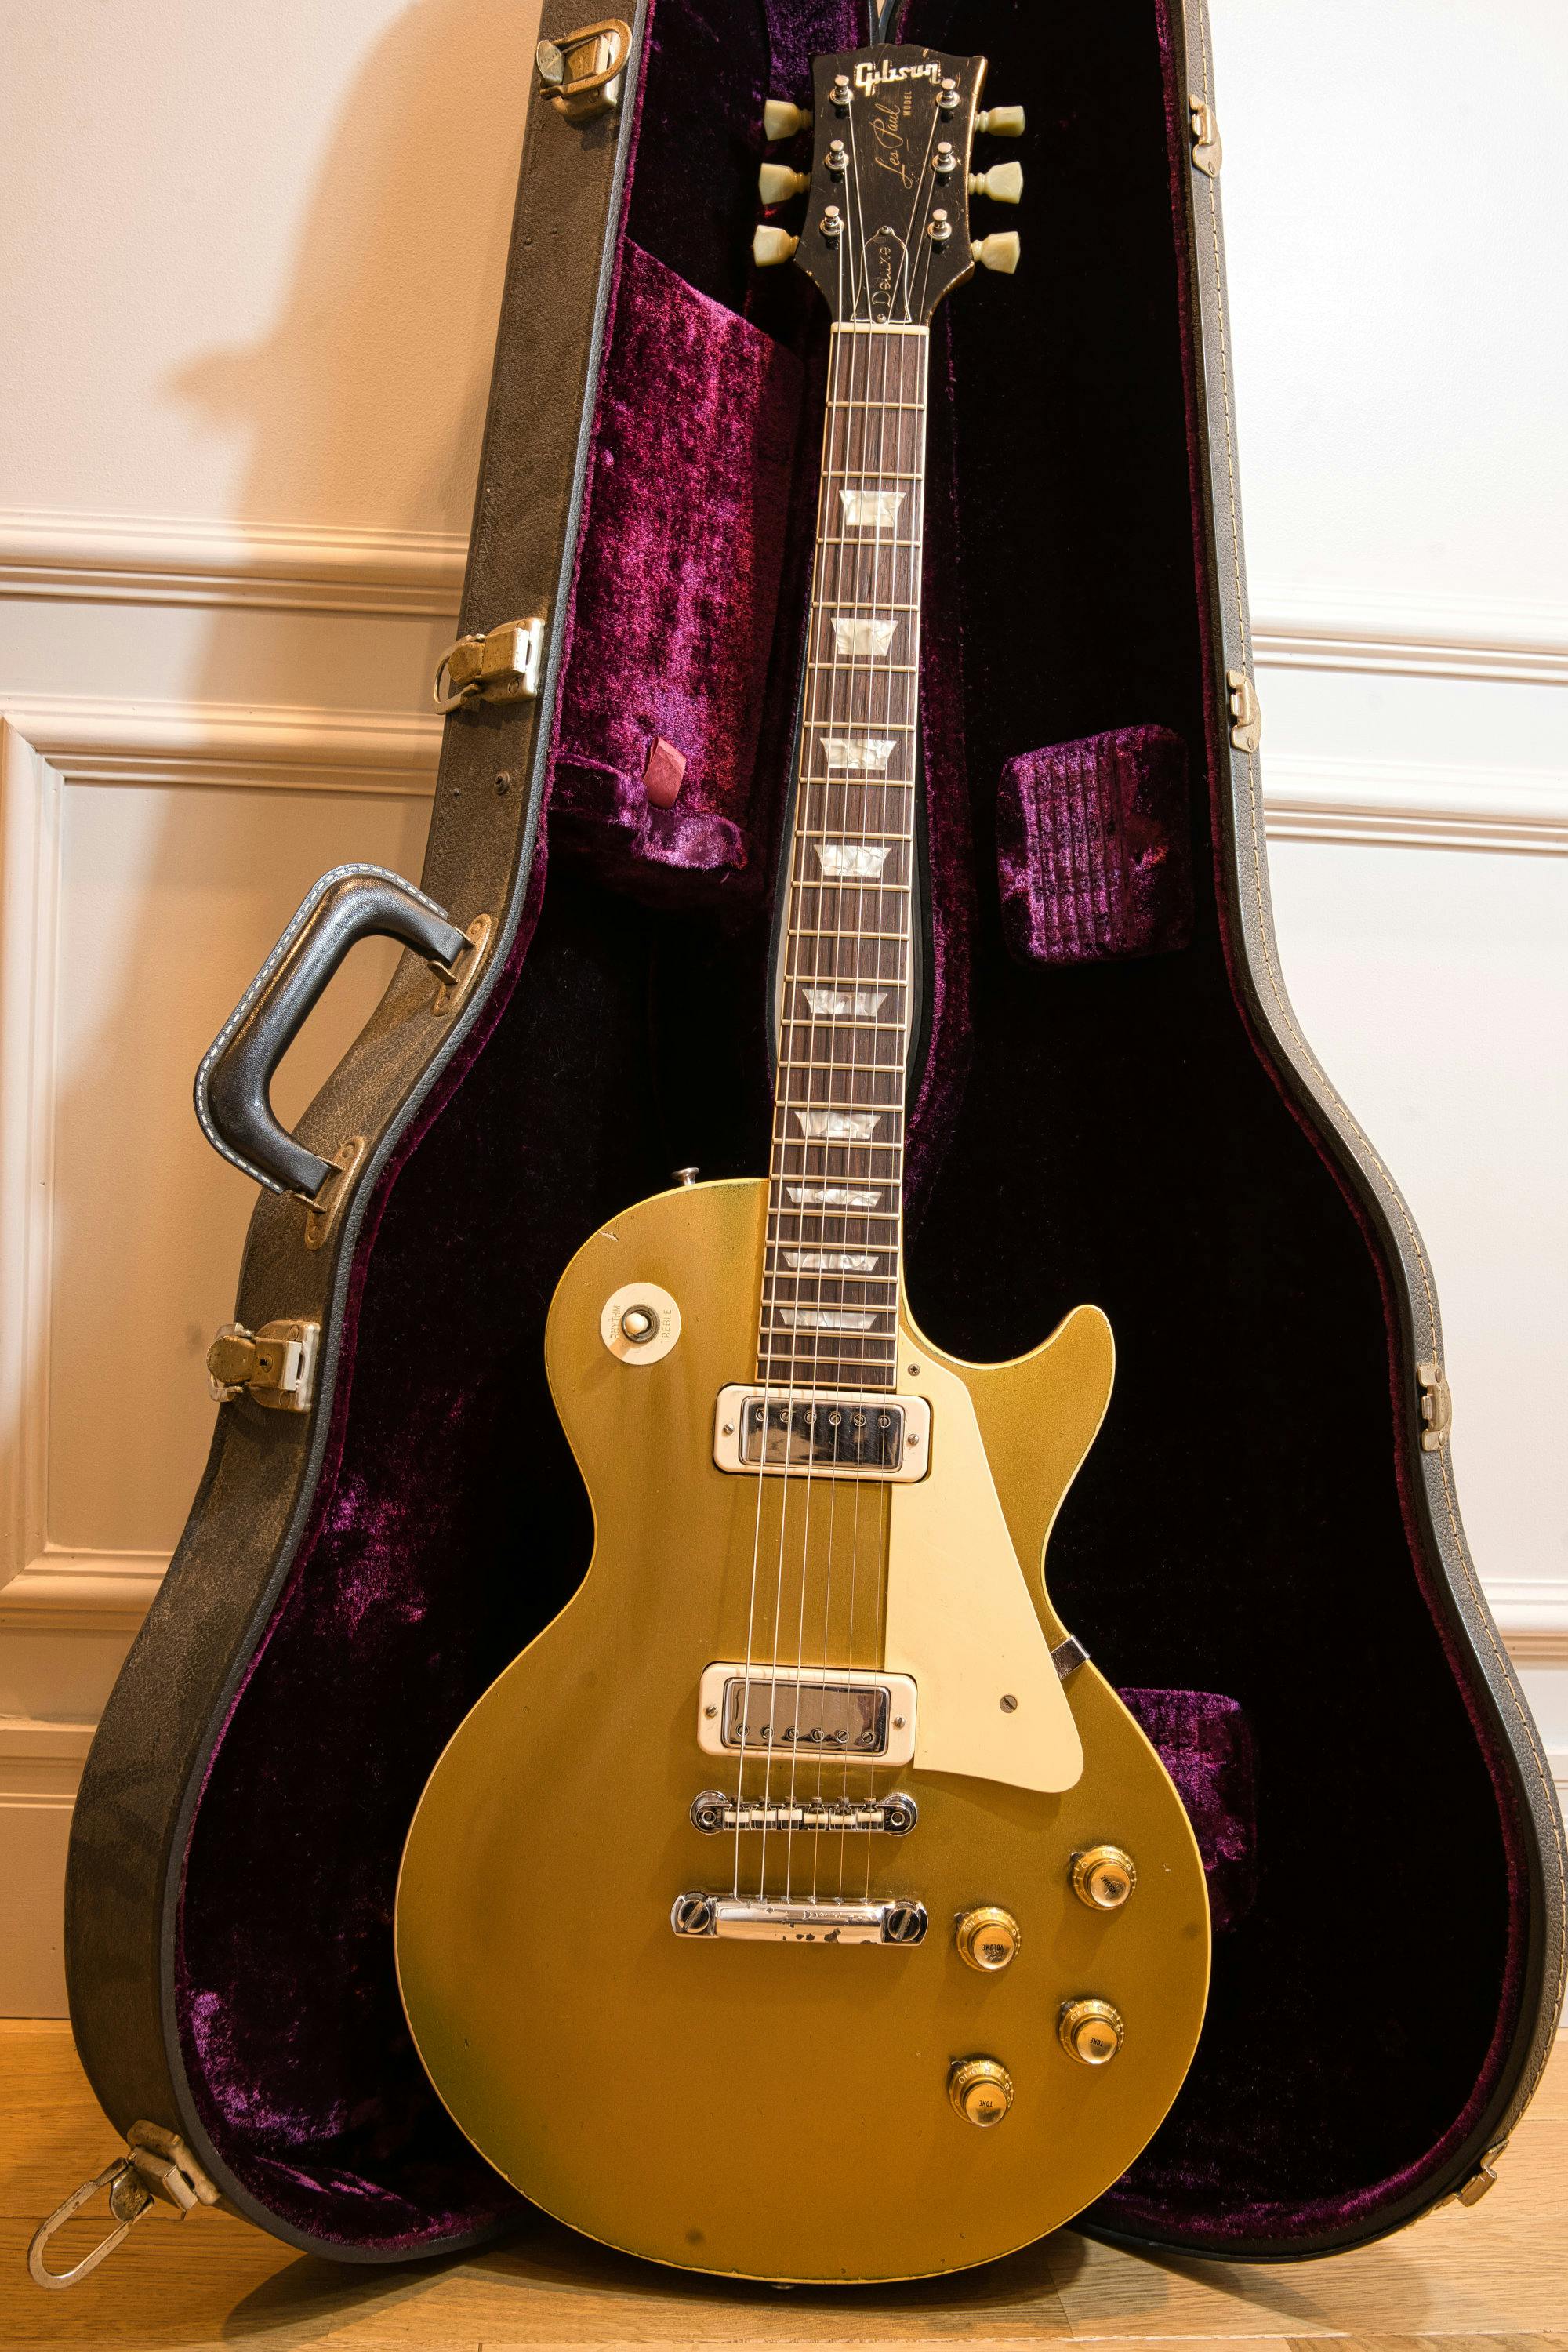 69' Les Paul Deluxe cover image